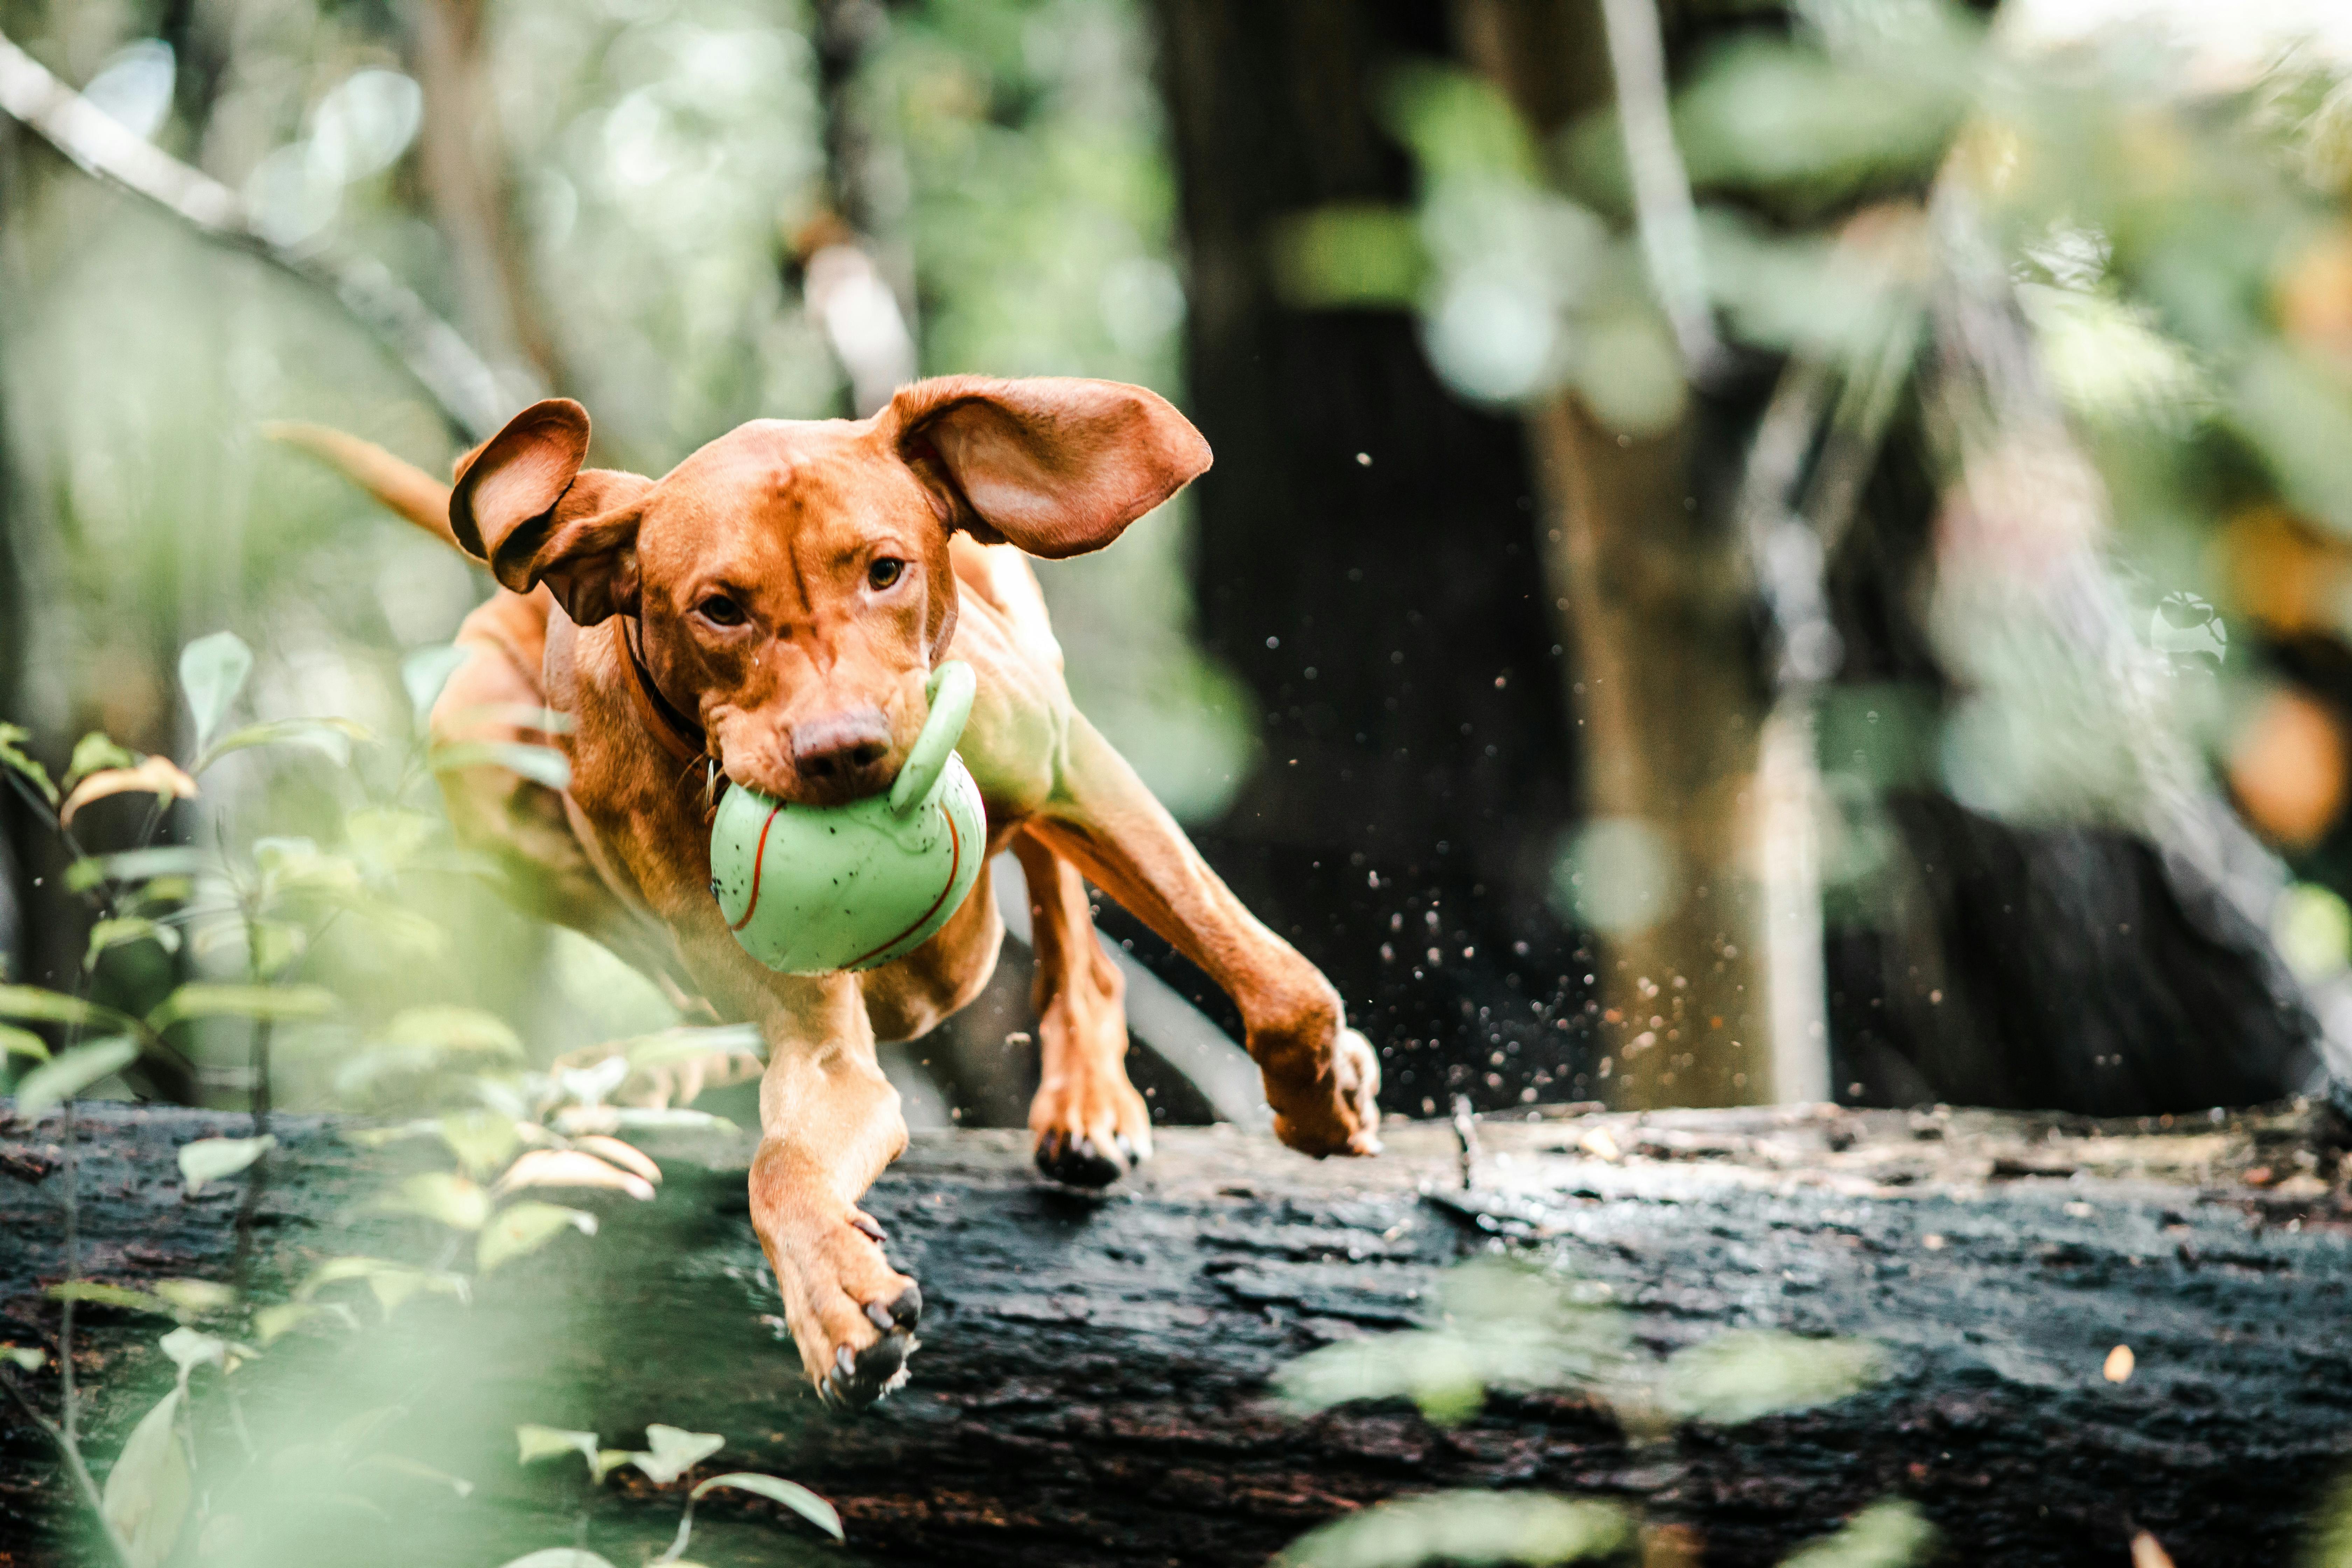 dog with ball in mouth jumping over a fallen tree trunk